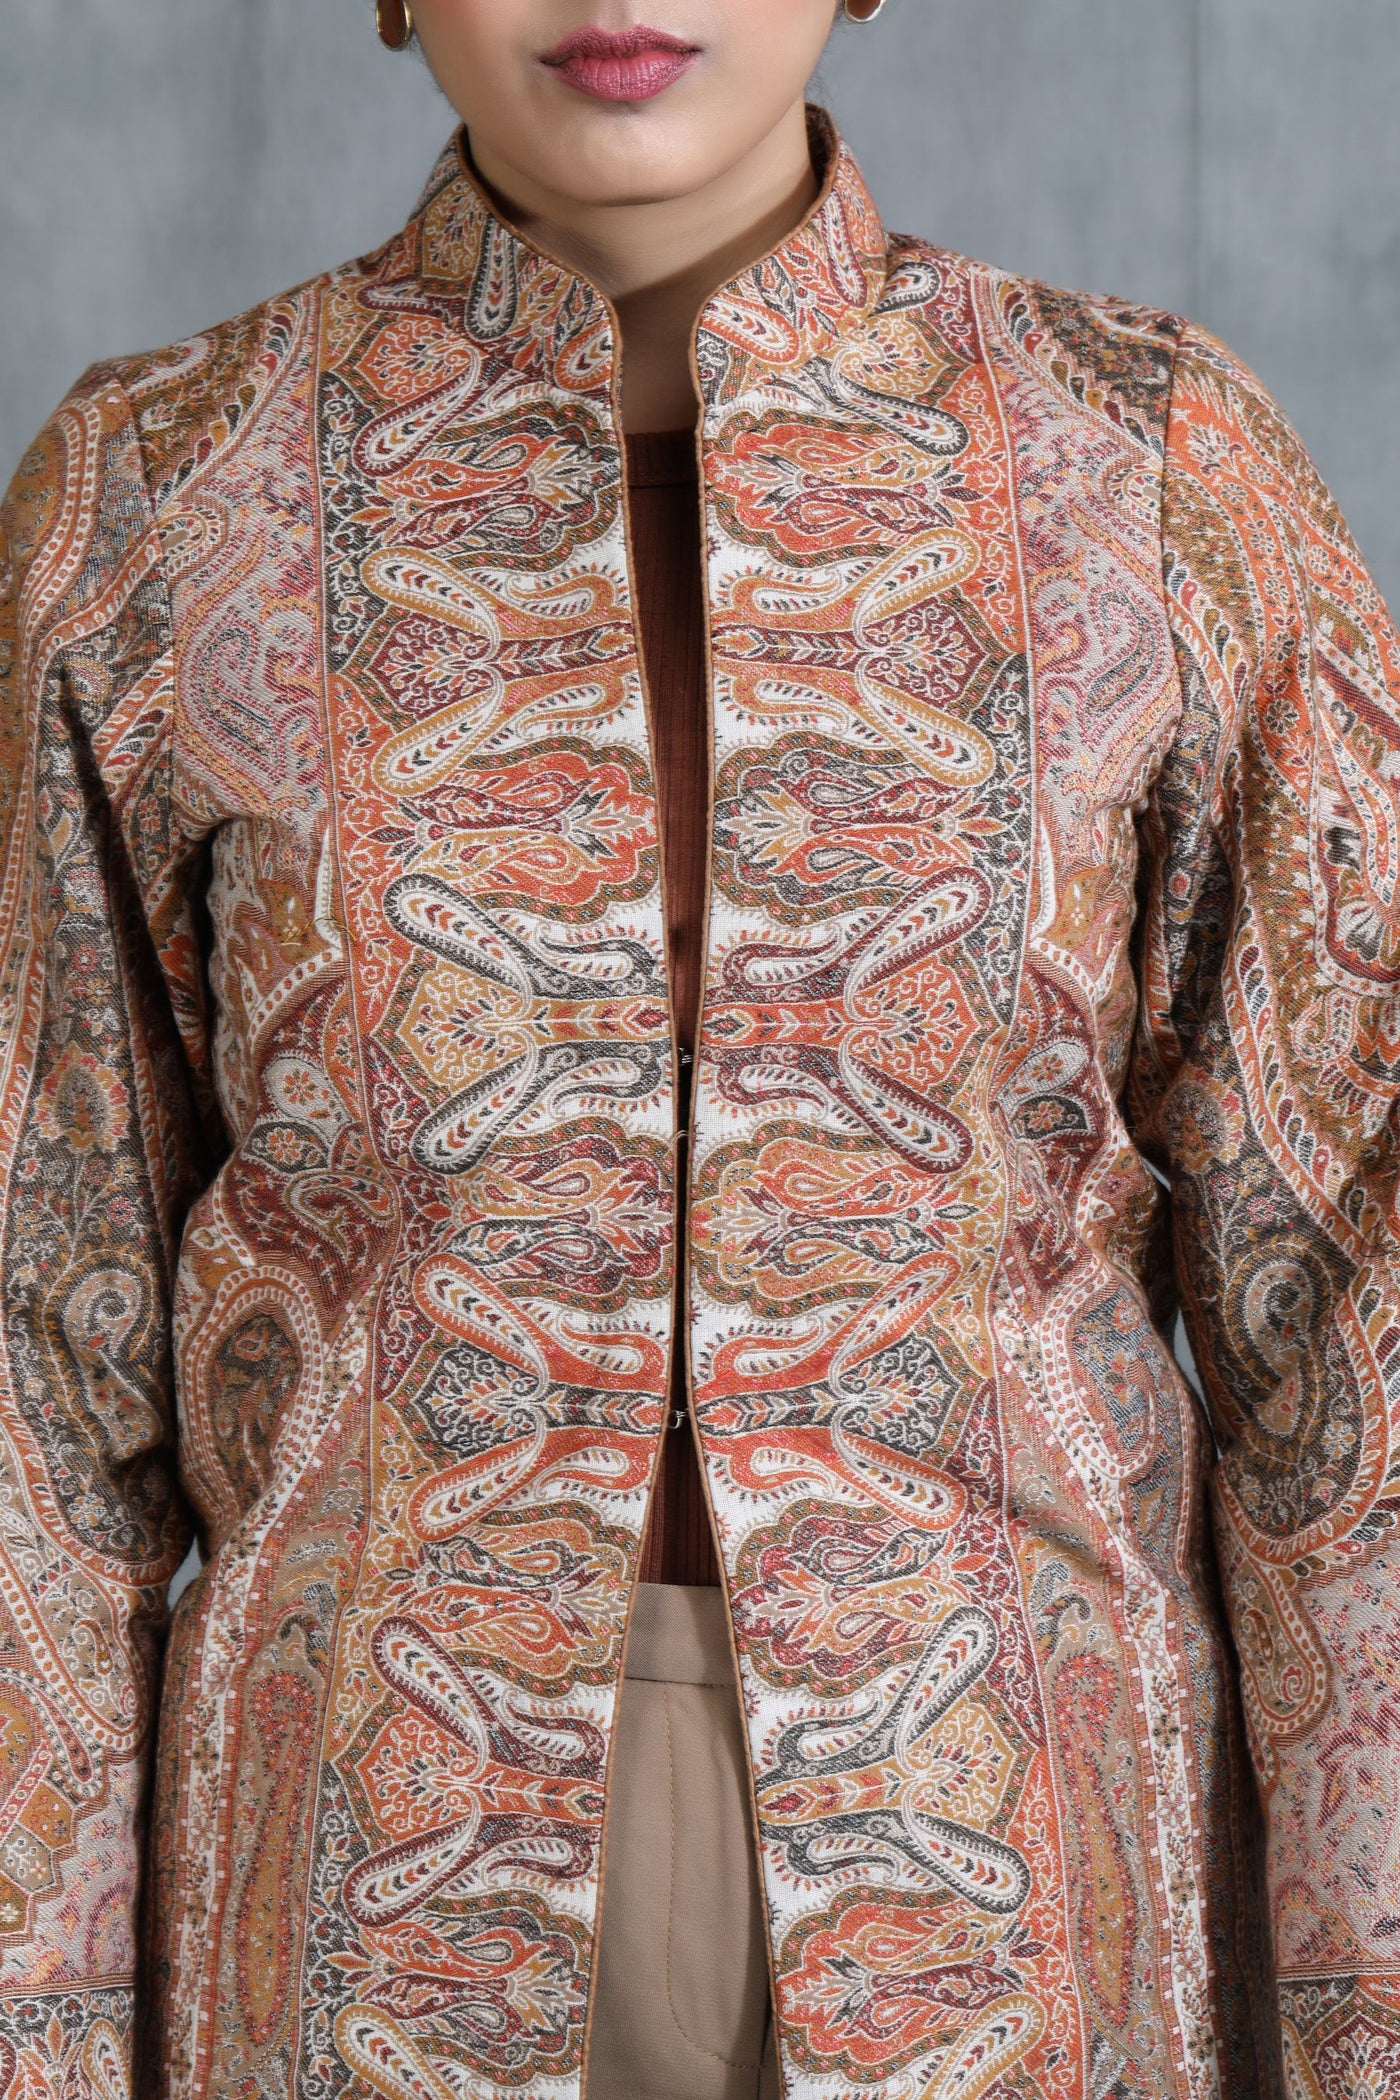 Vintage Full Jacket With Paisley Design